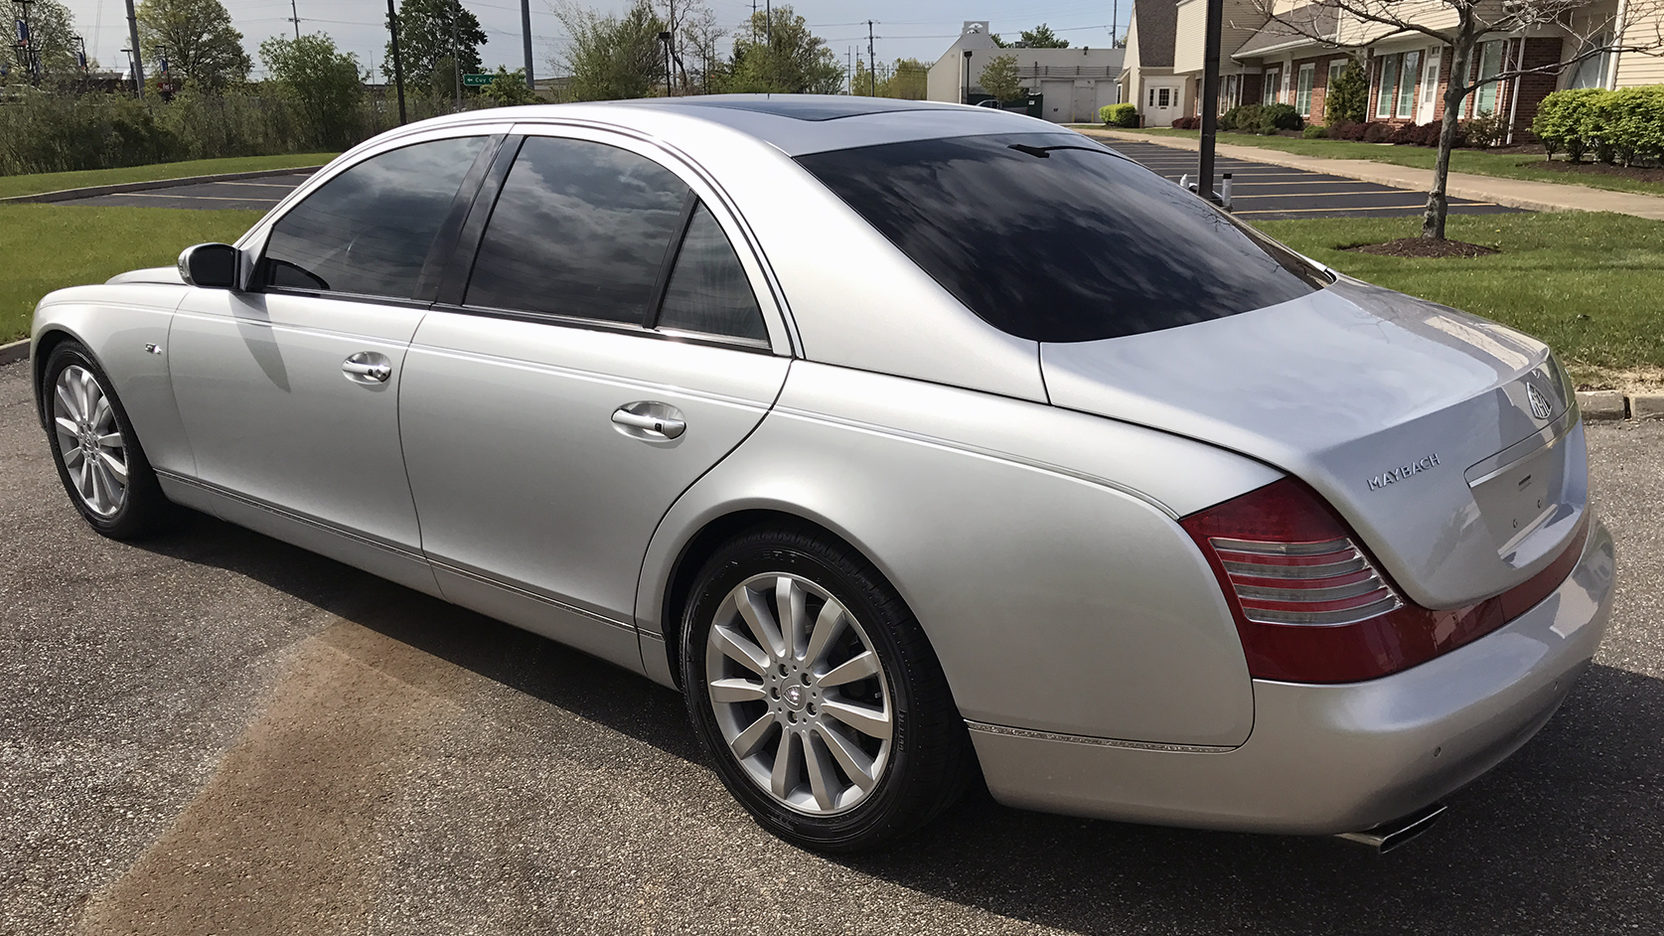 2009 Maybach 57 S | S33.1 | Indy 2017